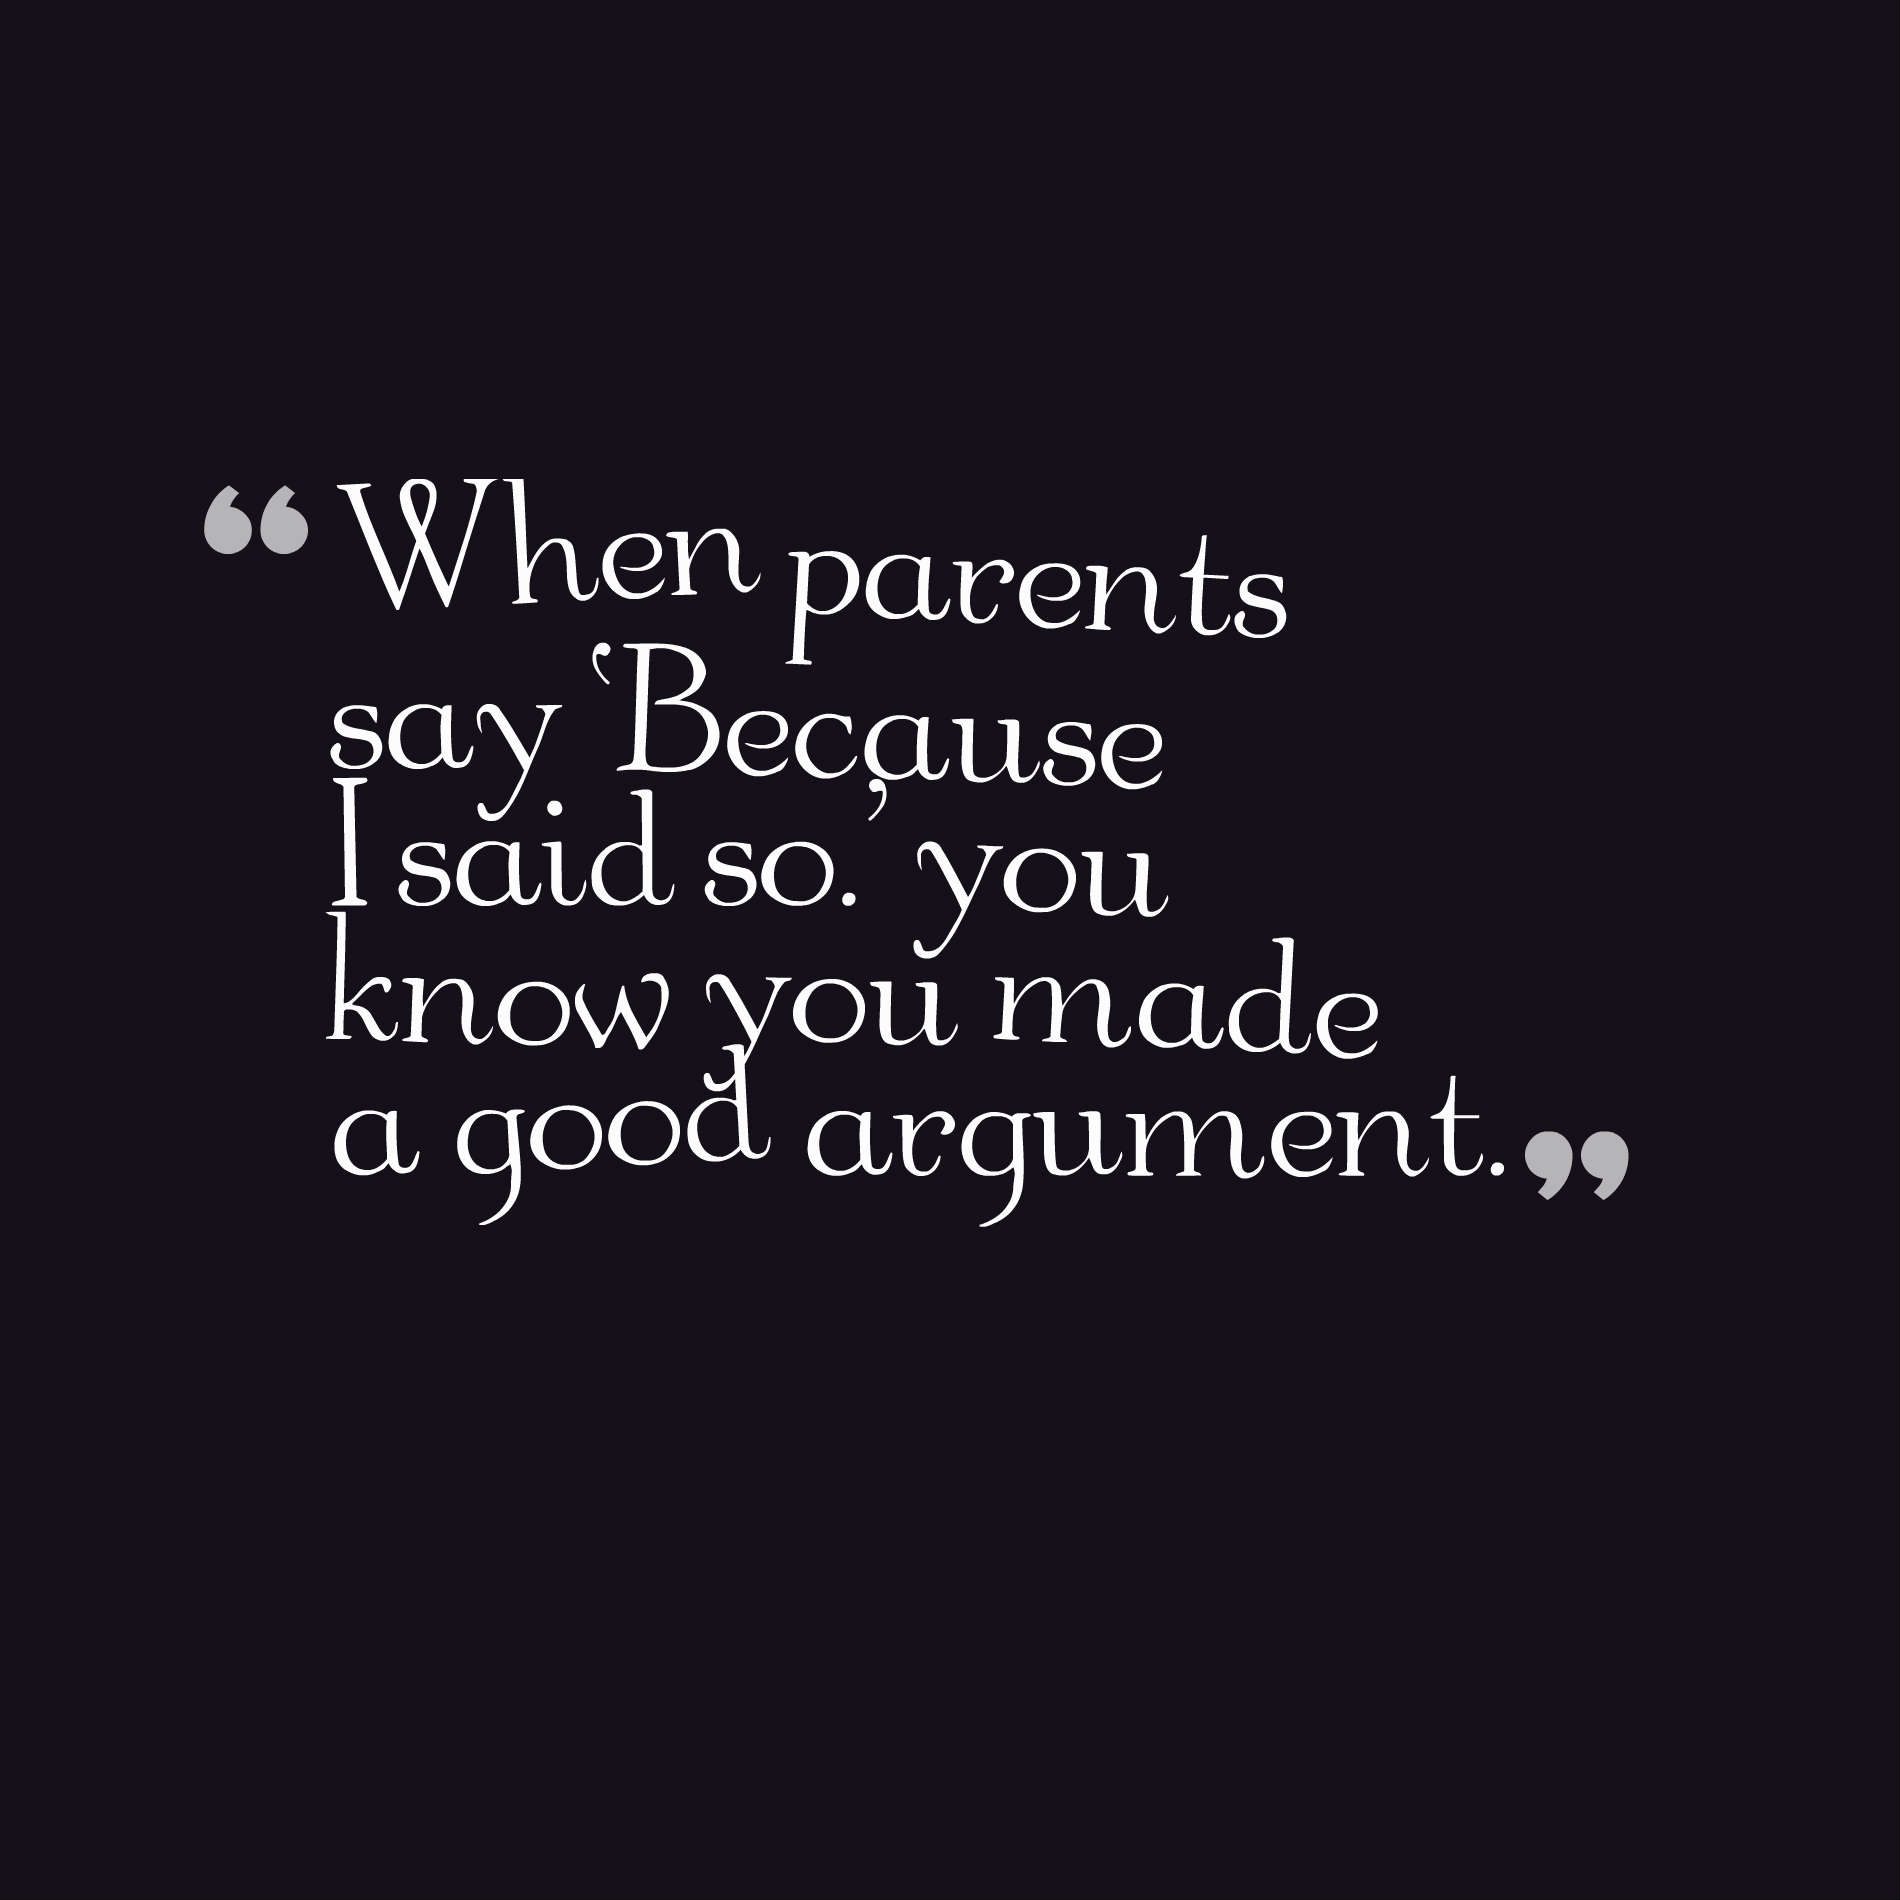 When parents say ‘Because I said so.’ you know you made a good argument.